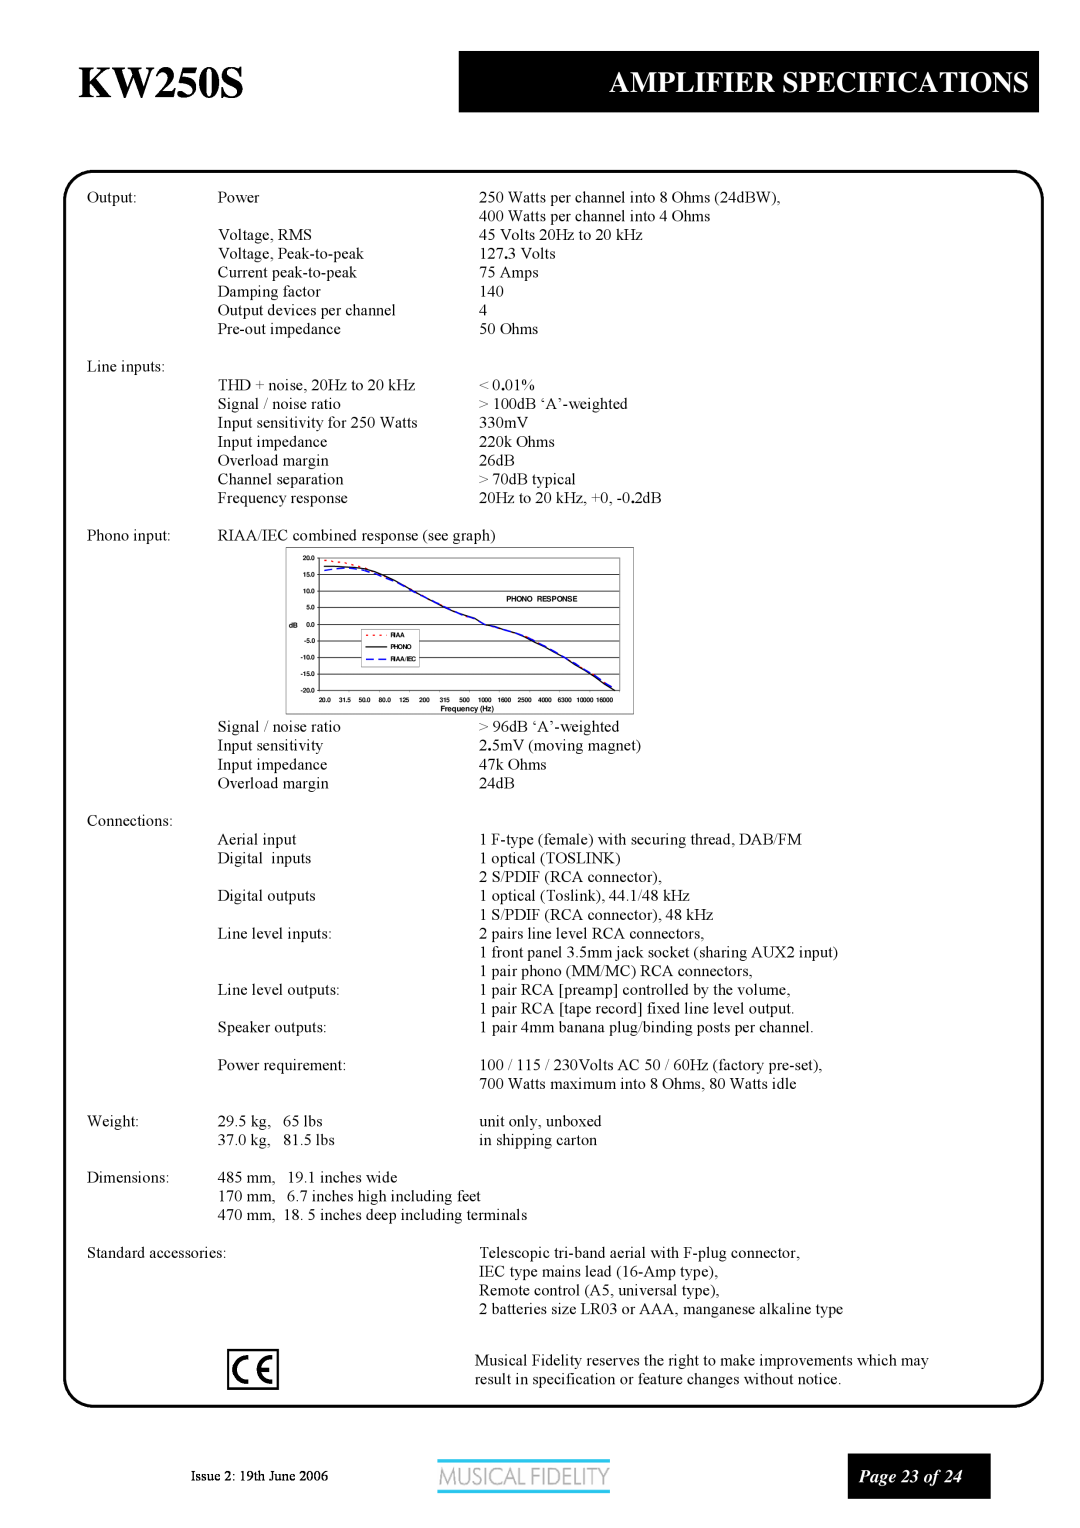 Musical Fidelity KW250S manual Amplifier Specifications, Page 23 of 